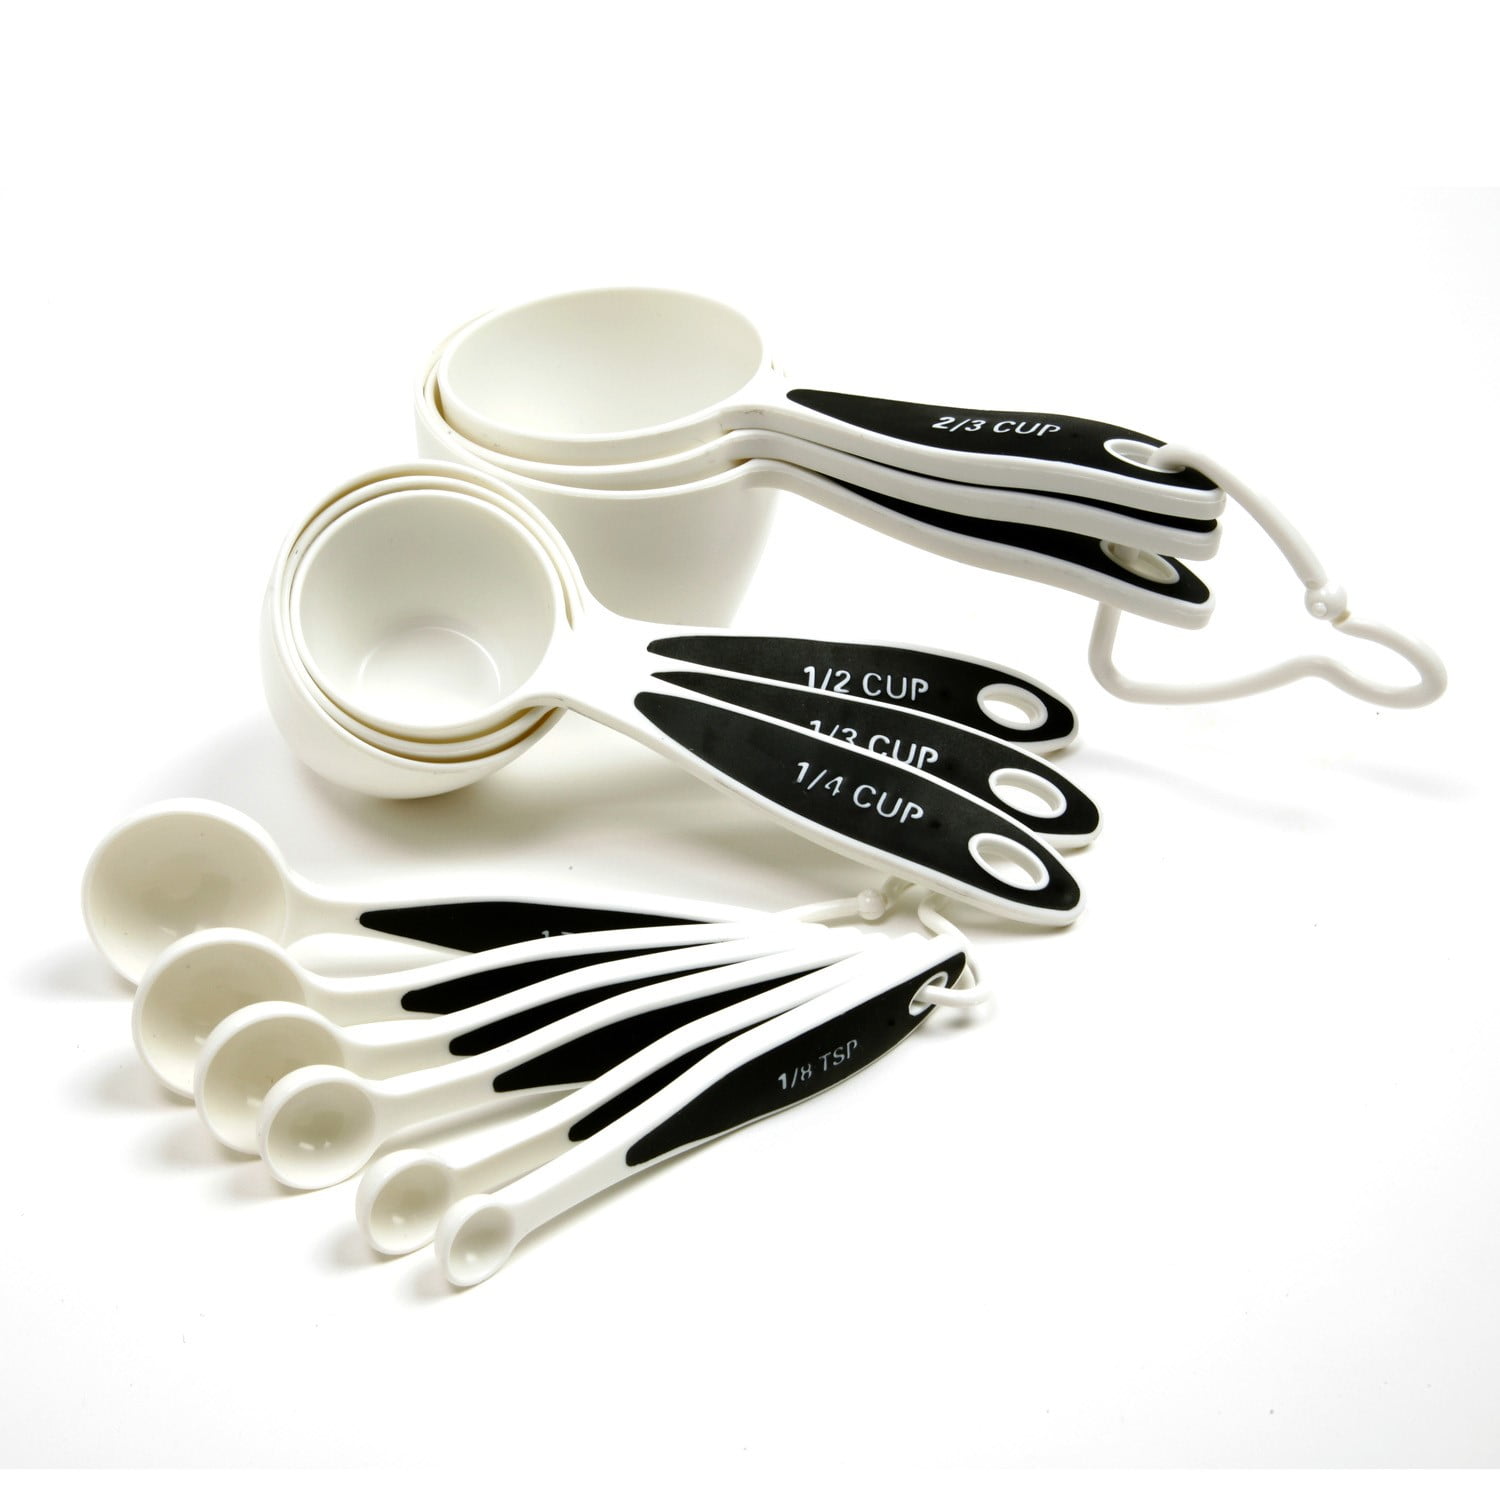 measuring cups and spoons amazon